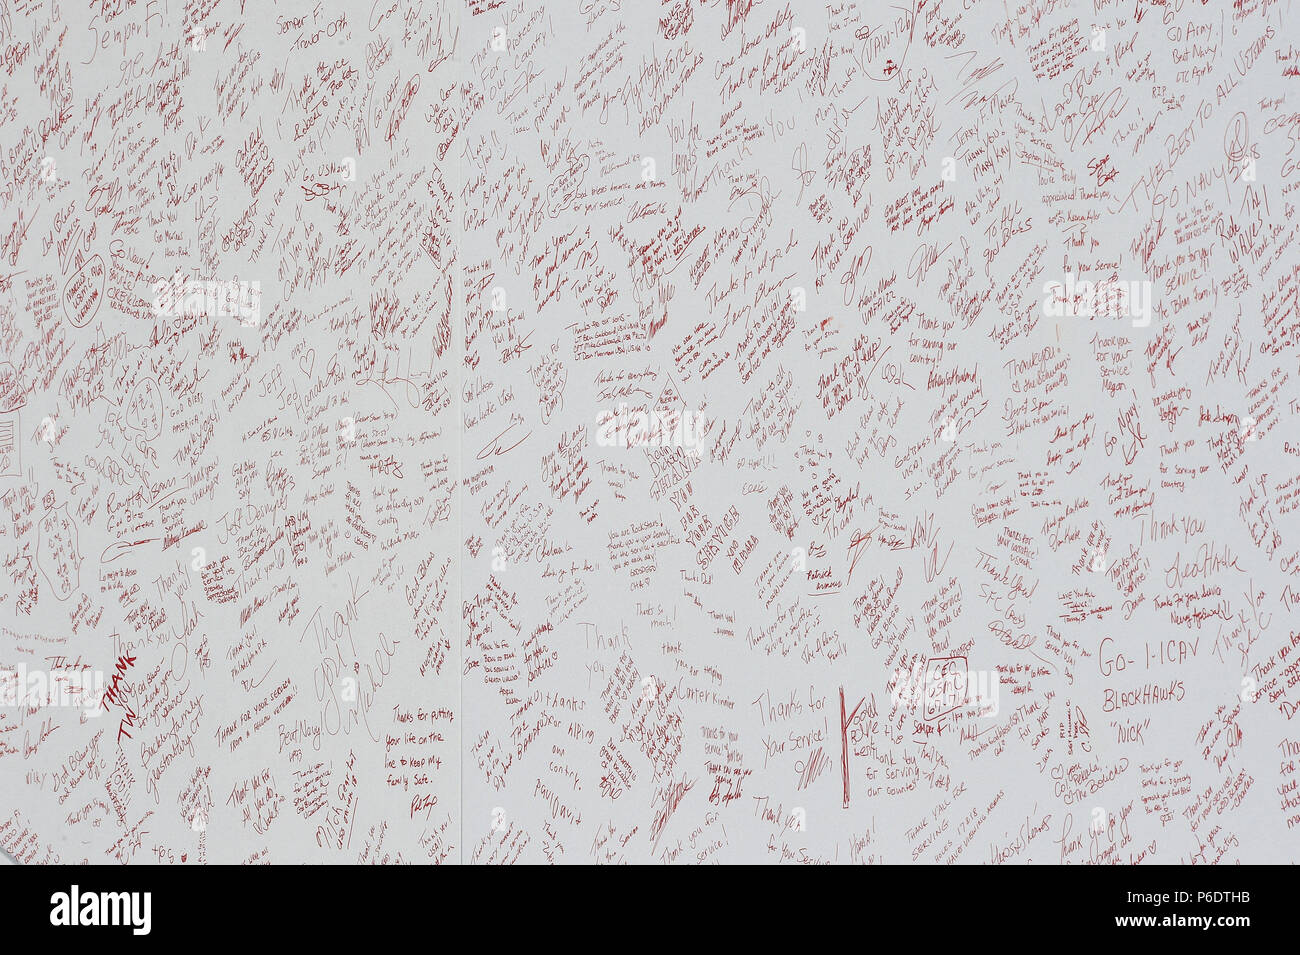 JUNE 29, 2018 - Signatures fill the salute to the military wall during the second round at the 2018 Quicken Loans National at the Tournament Players Club in Potomac Maryland. Stock Photo